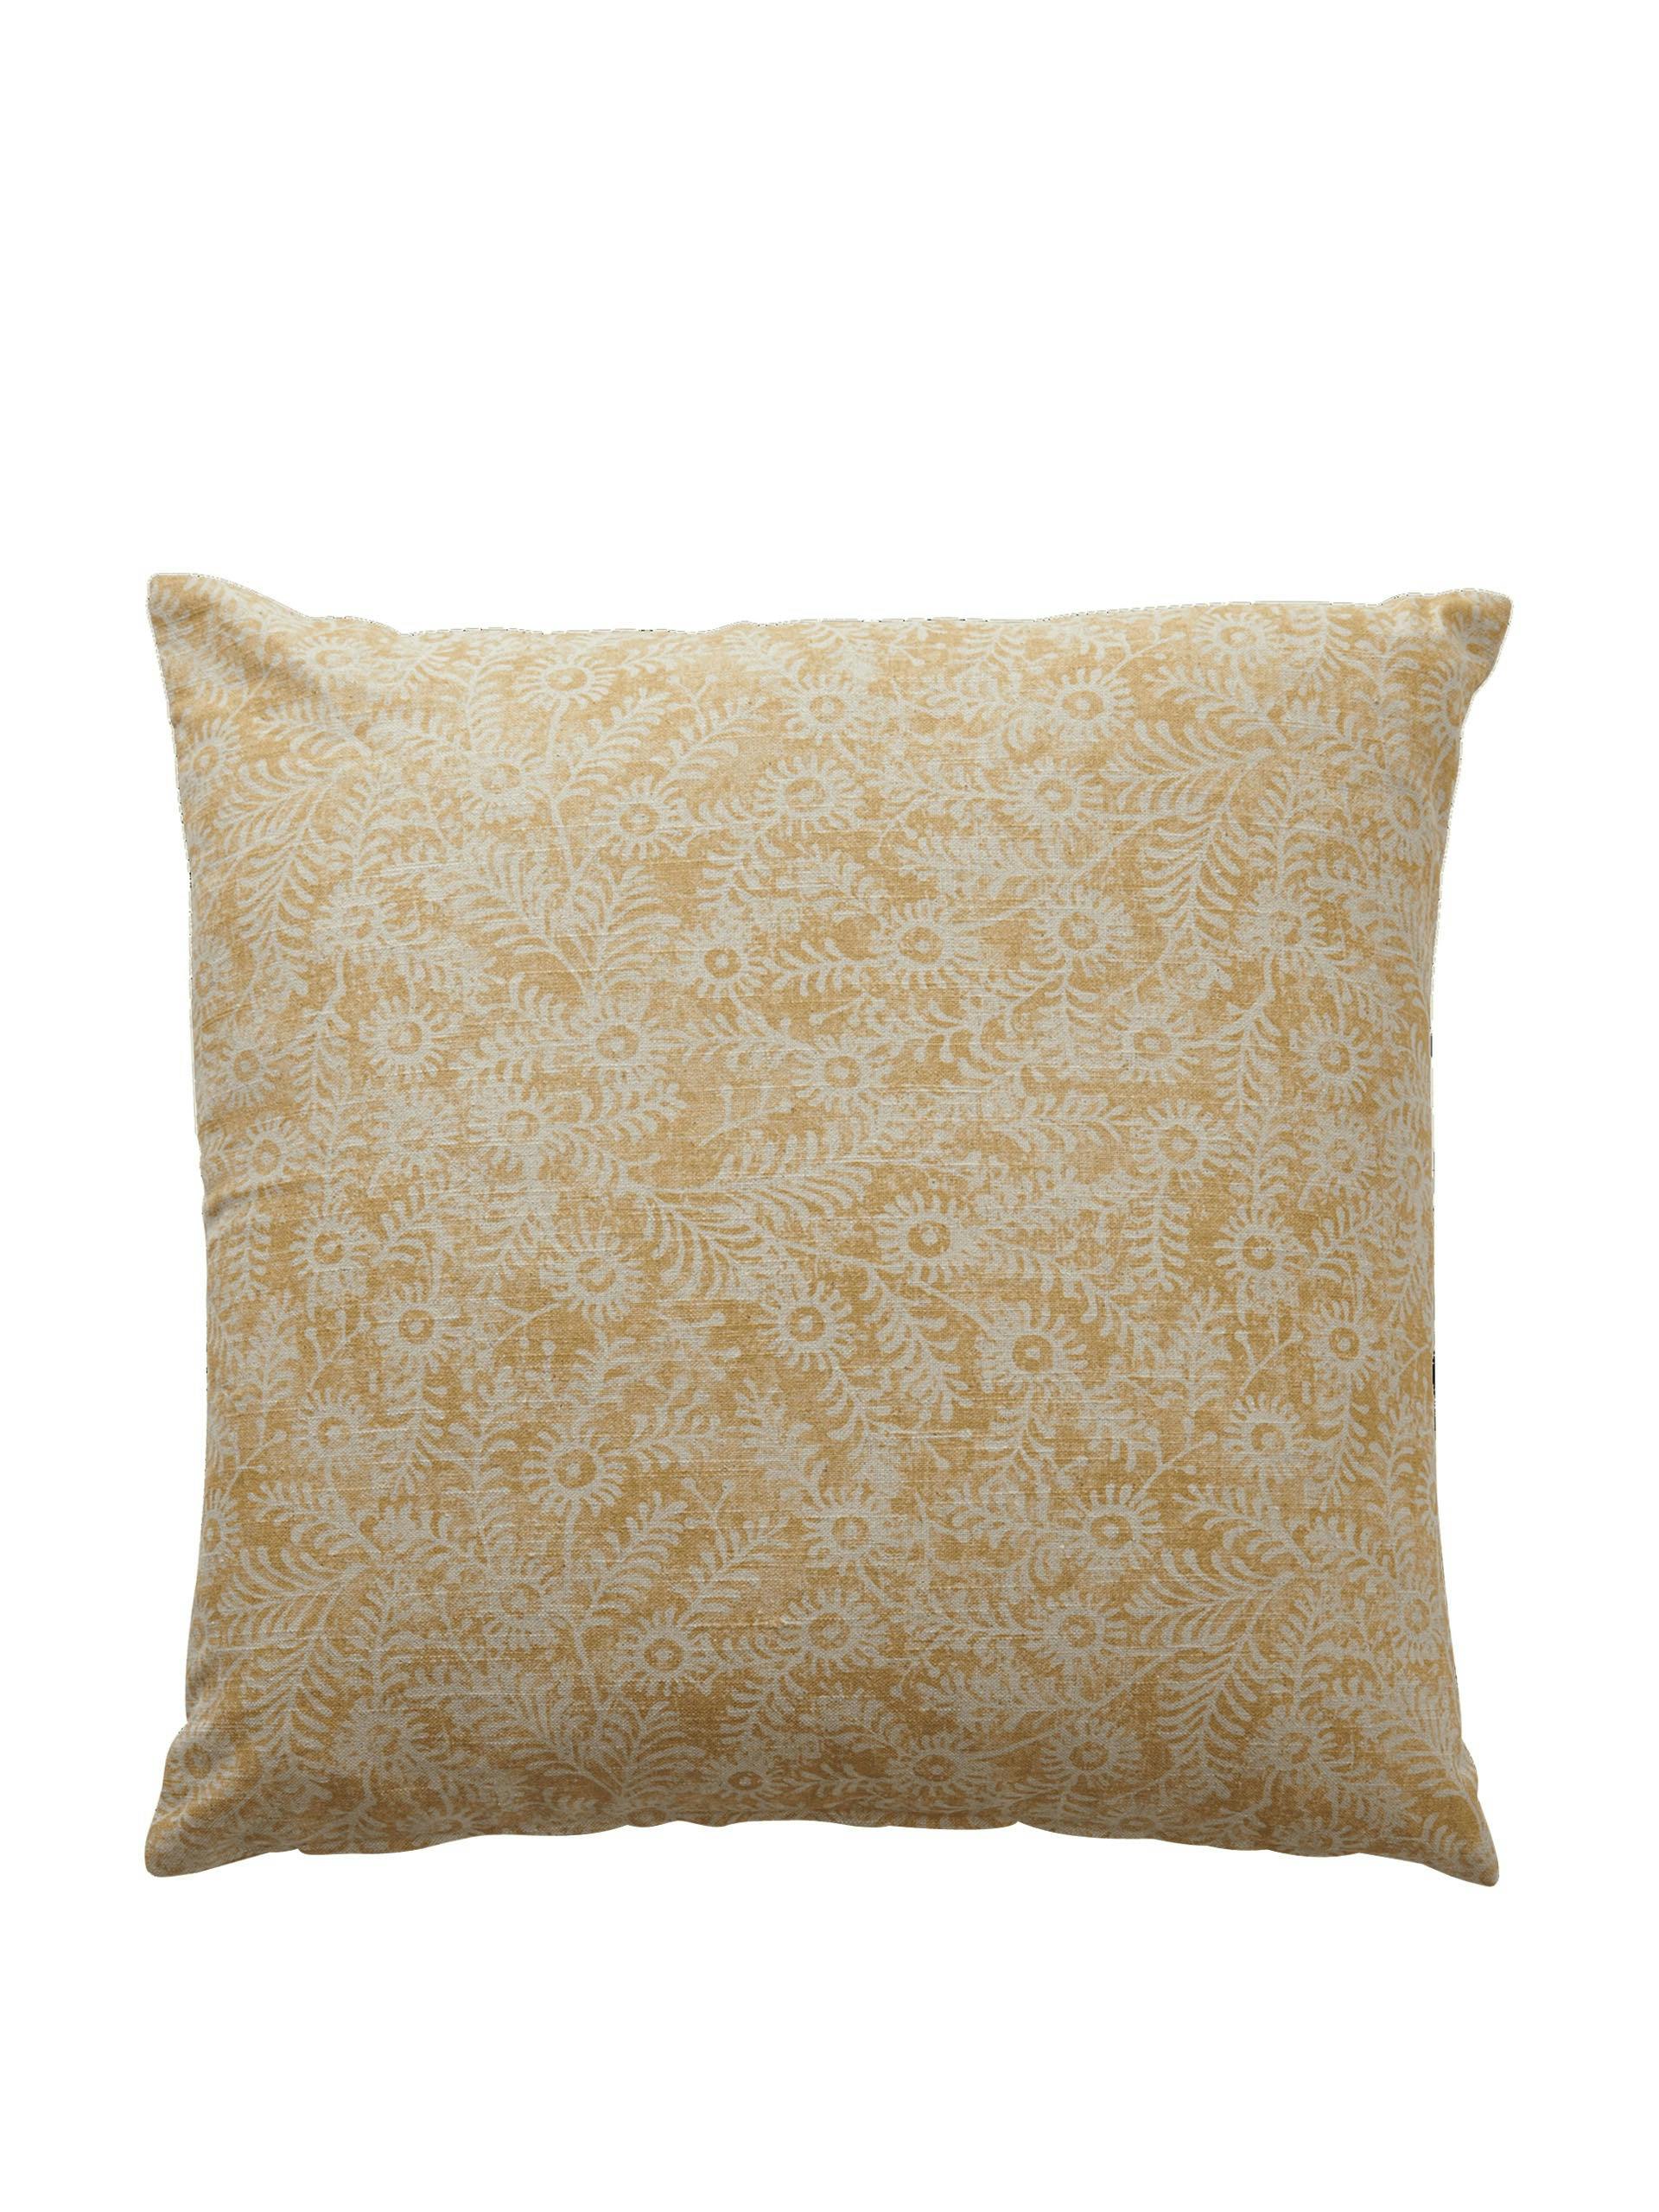 Large square cushion in yellow